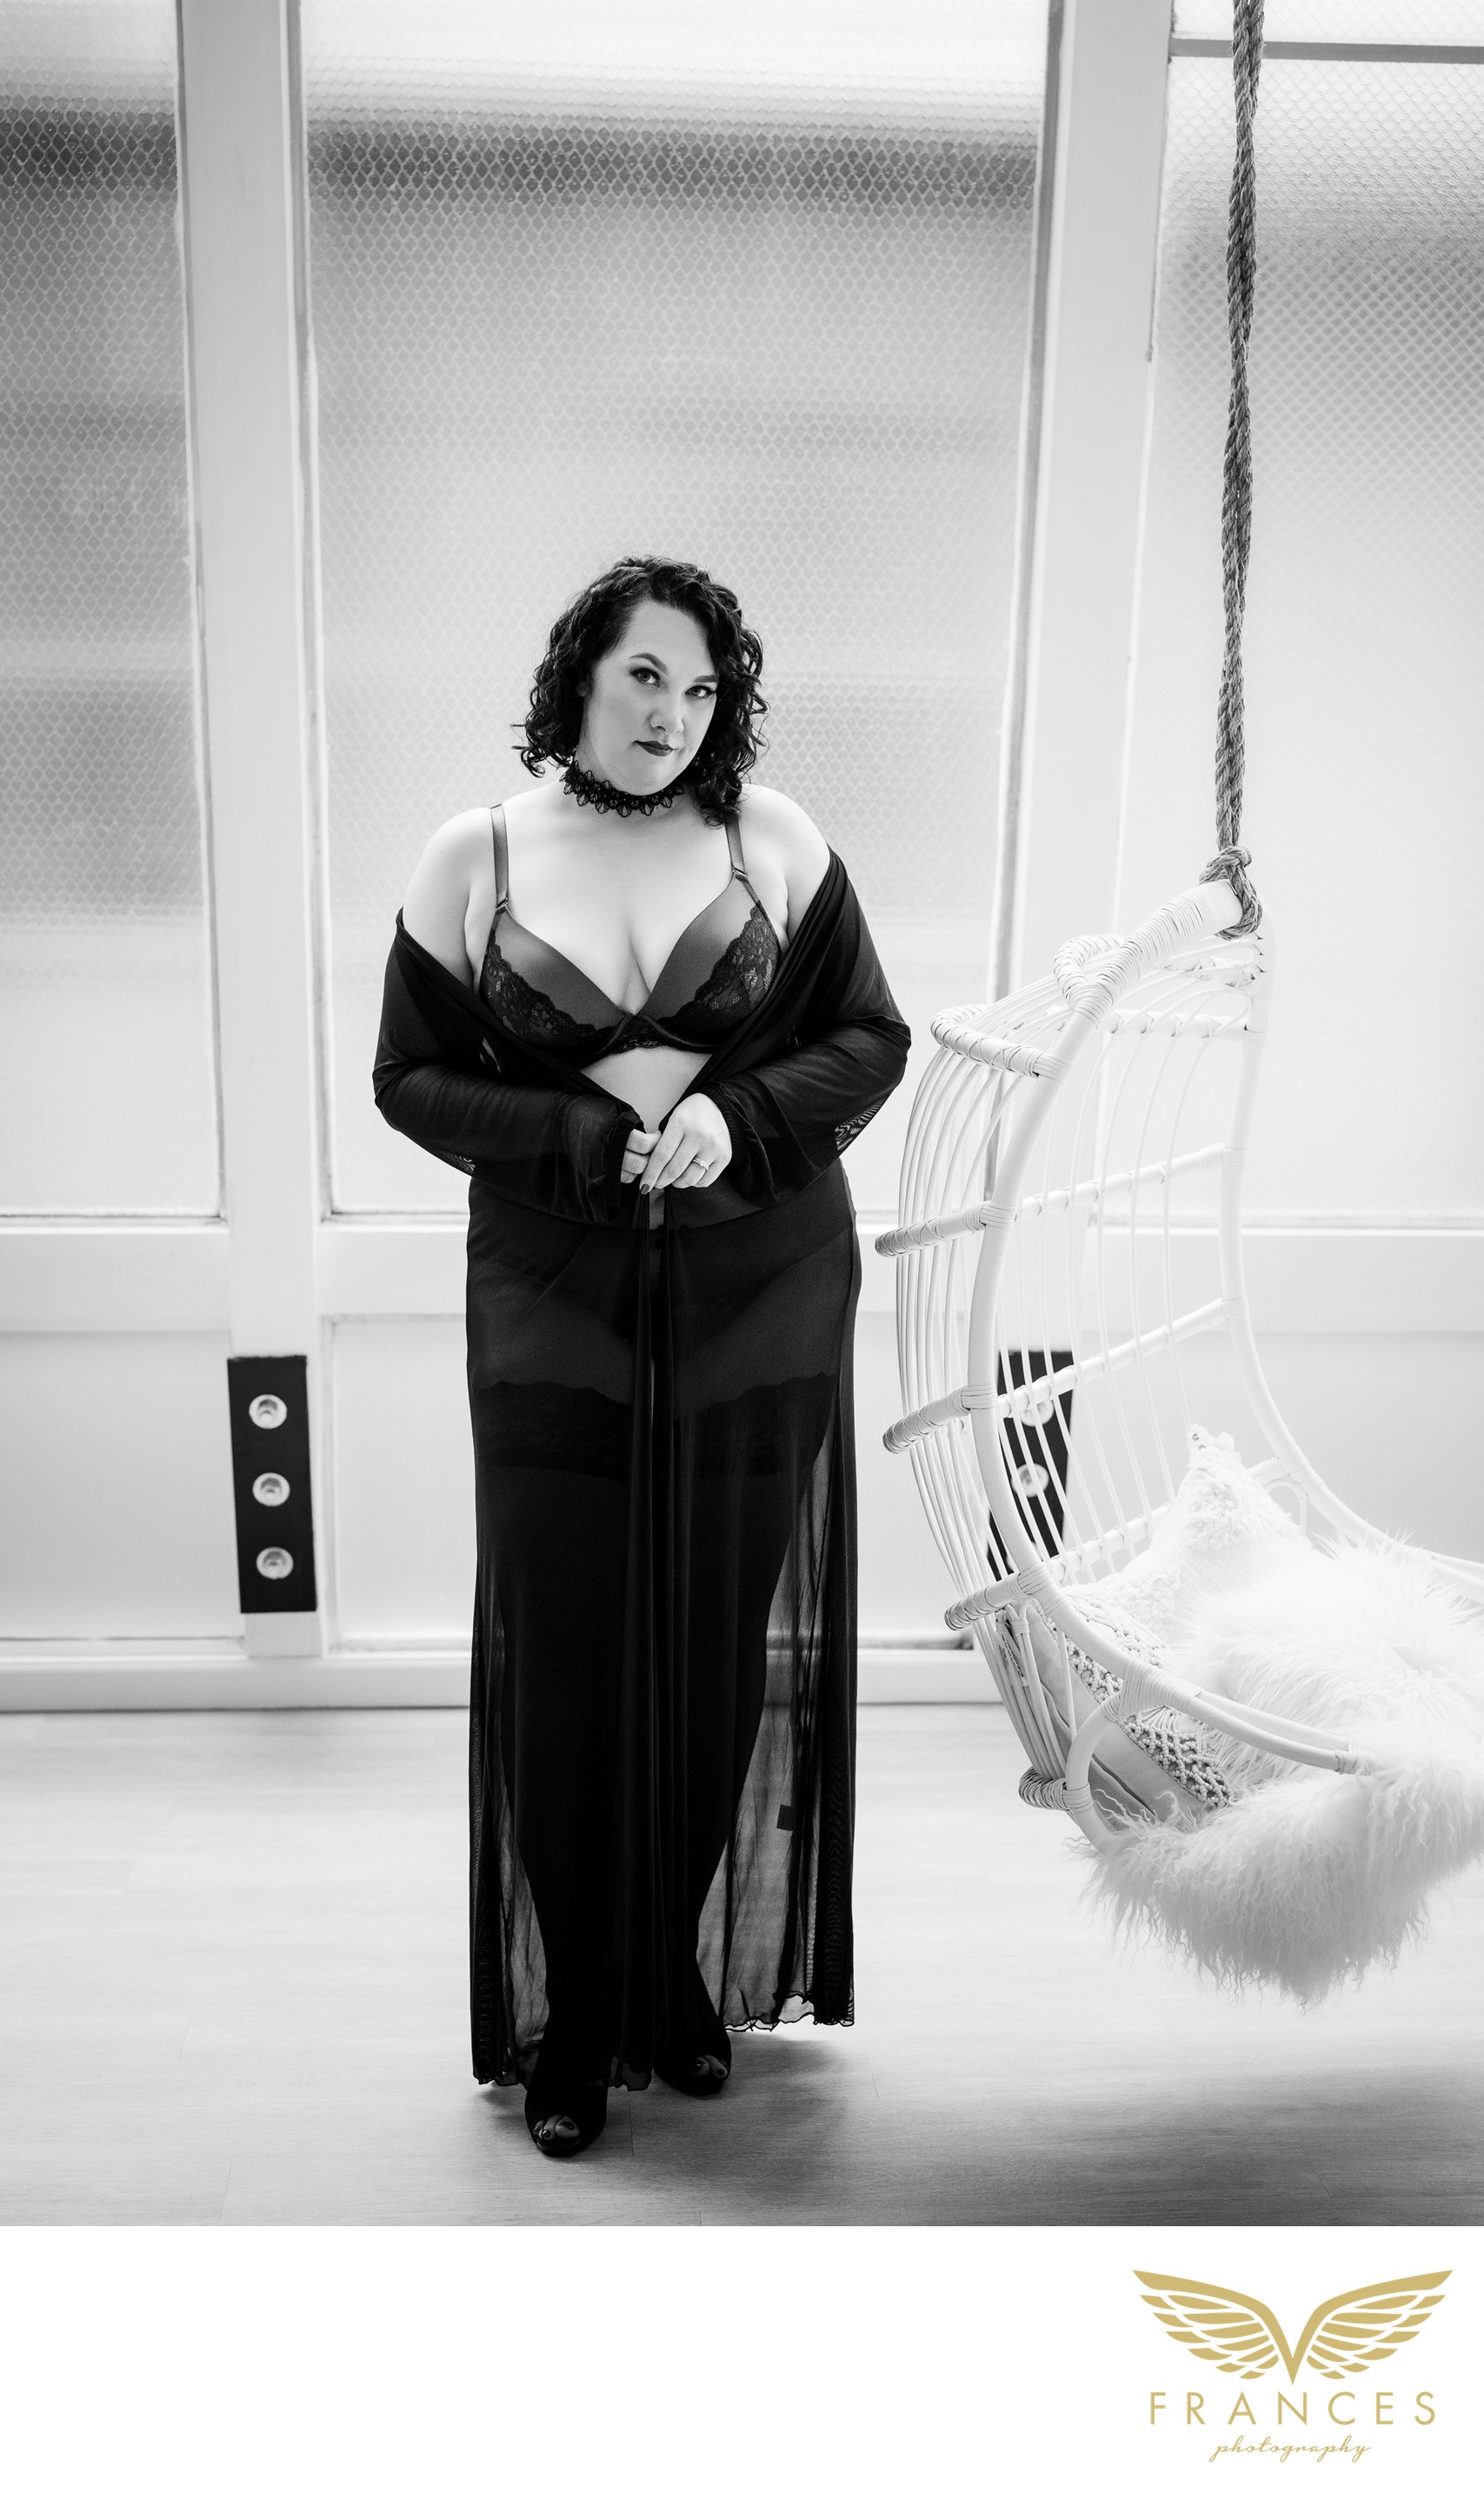 Plus Size Boudoir Image In Black And White Gallery Frances Photography